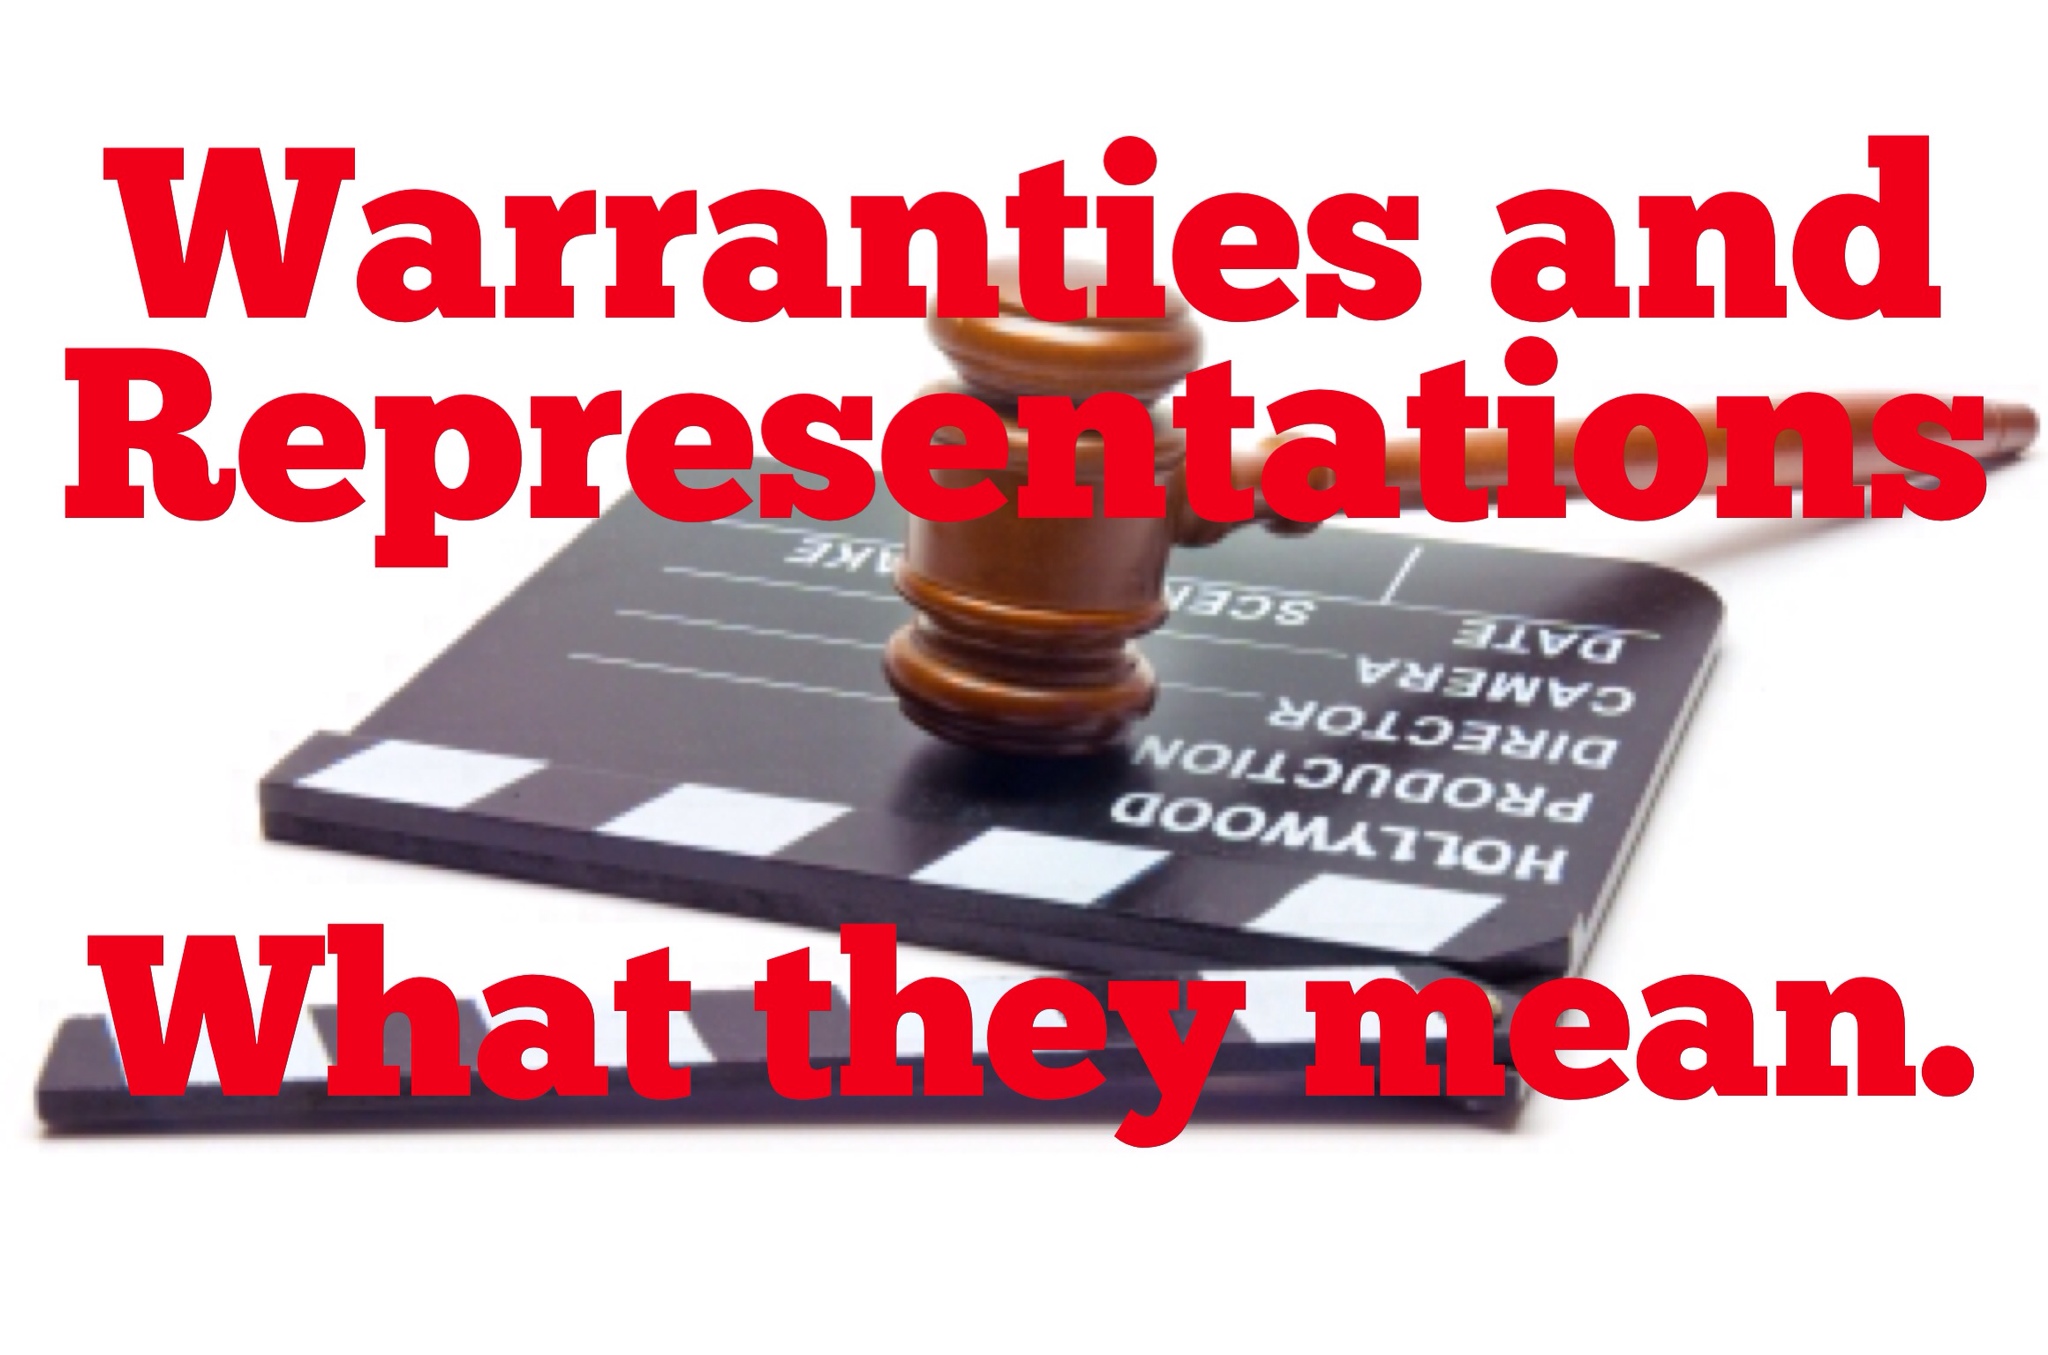 meaning of representations and warranties